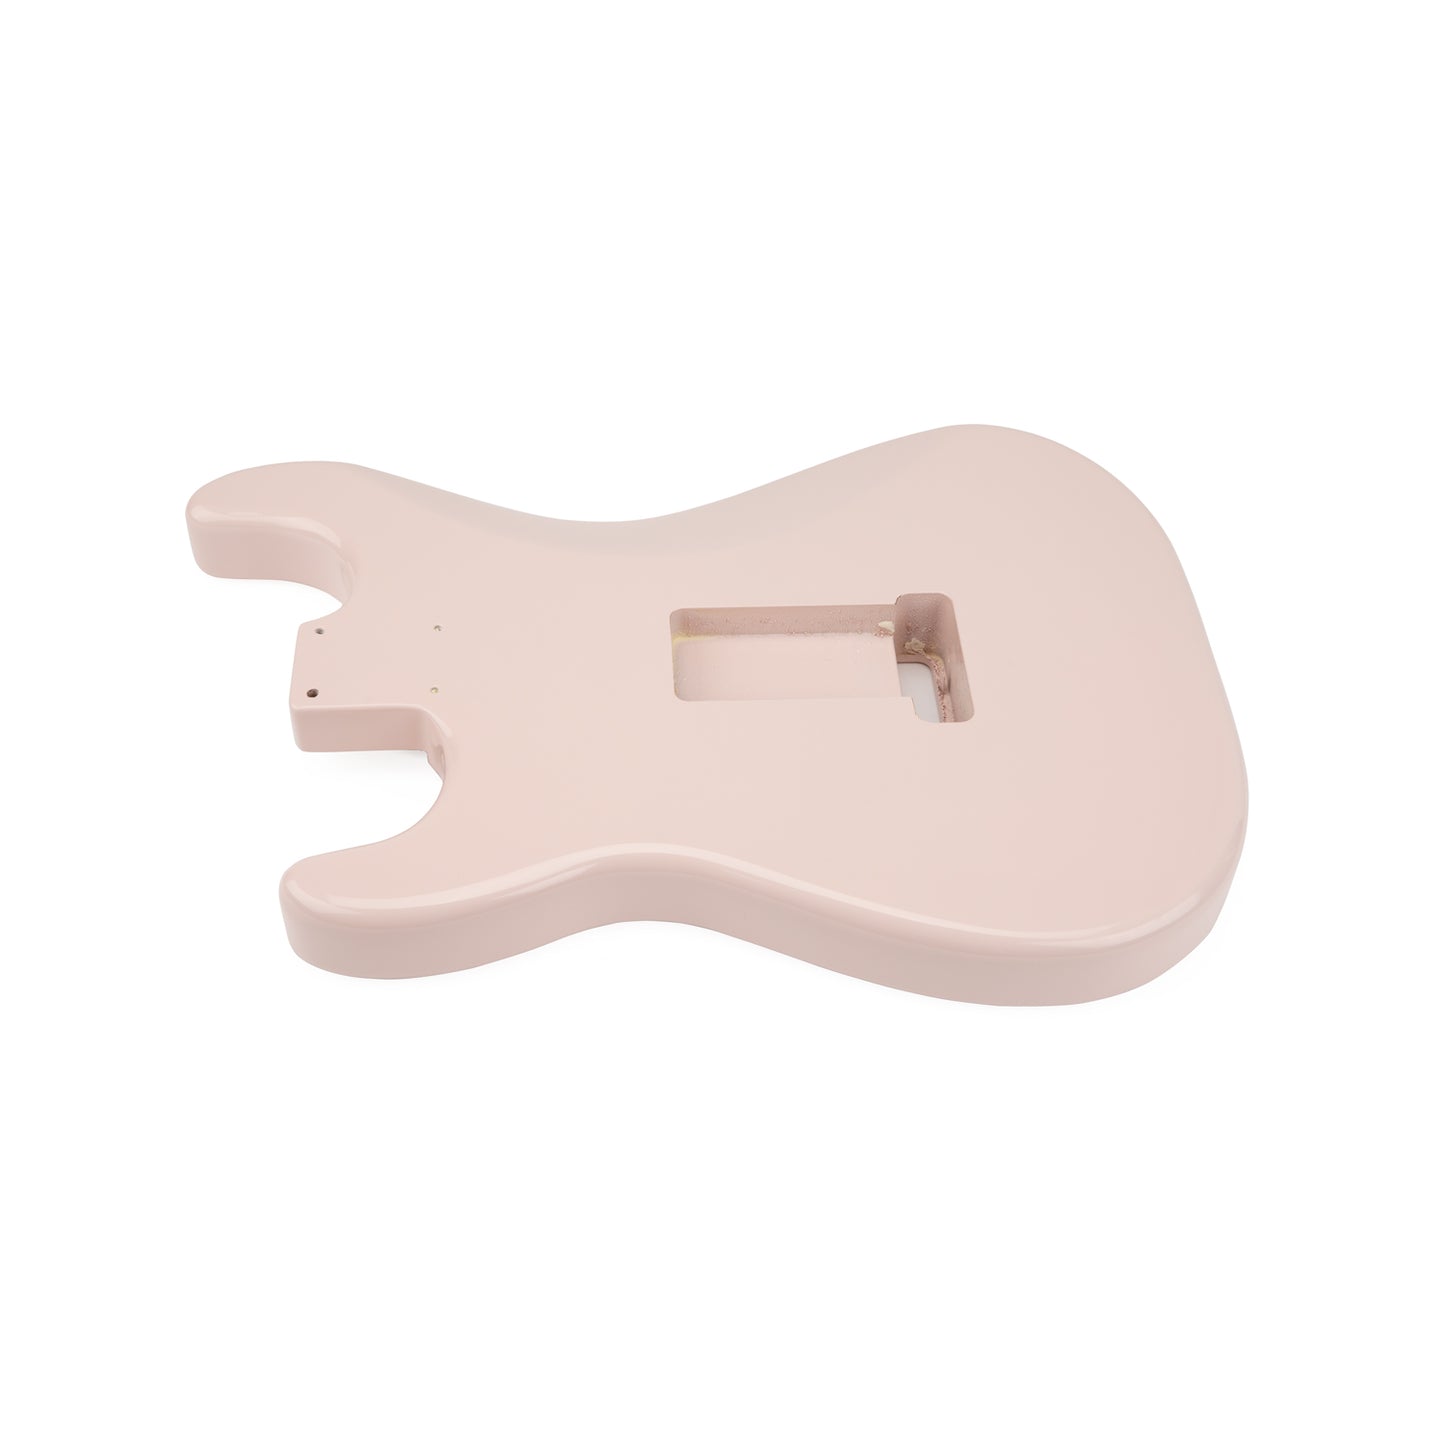 AE Guitars® S-Style Alder Replacement Guitar Body Shell Pink